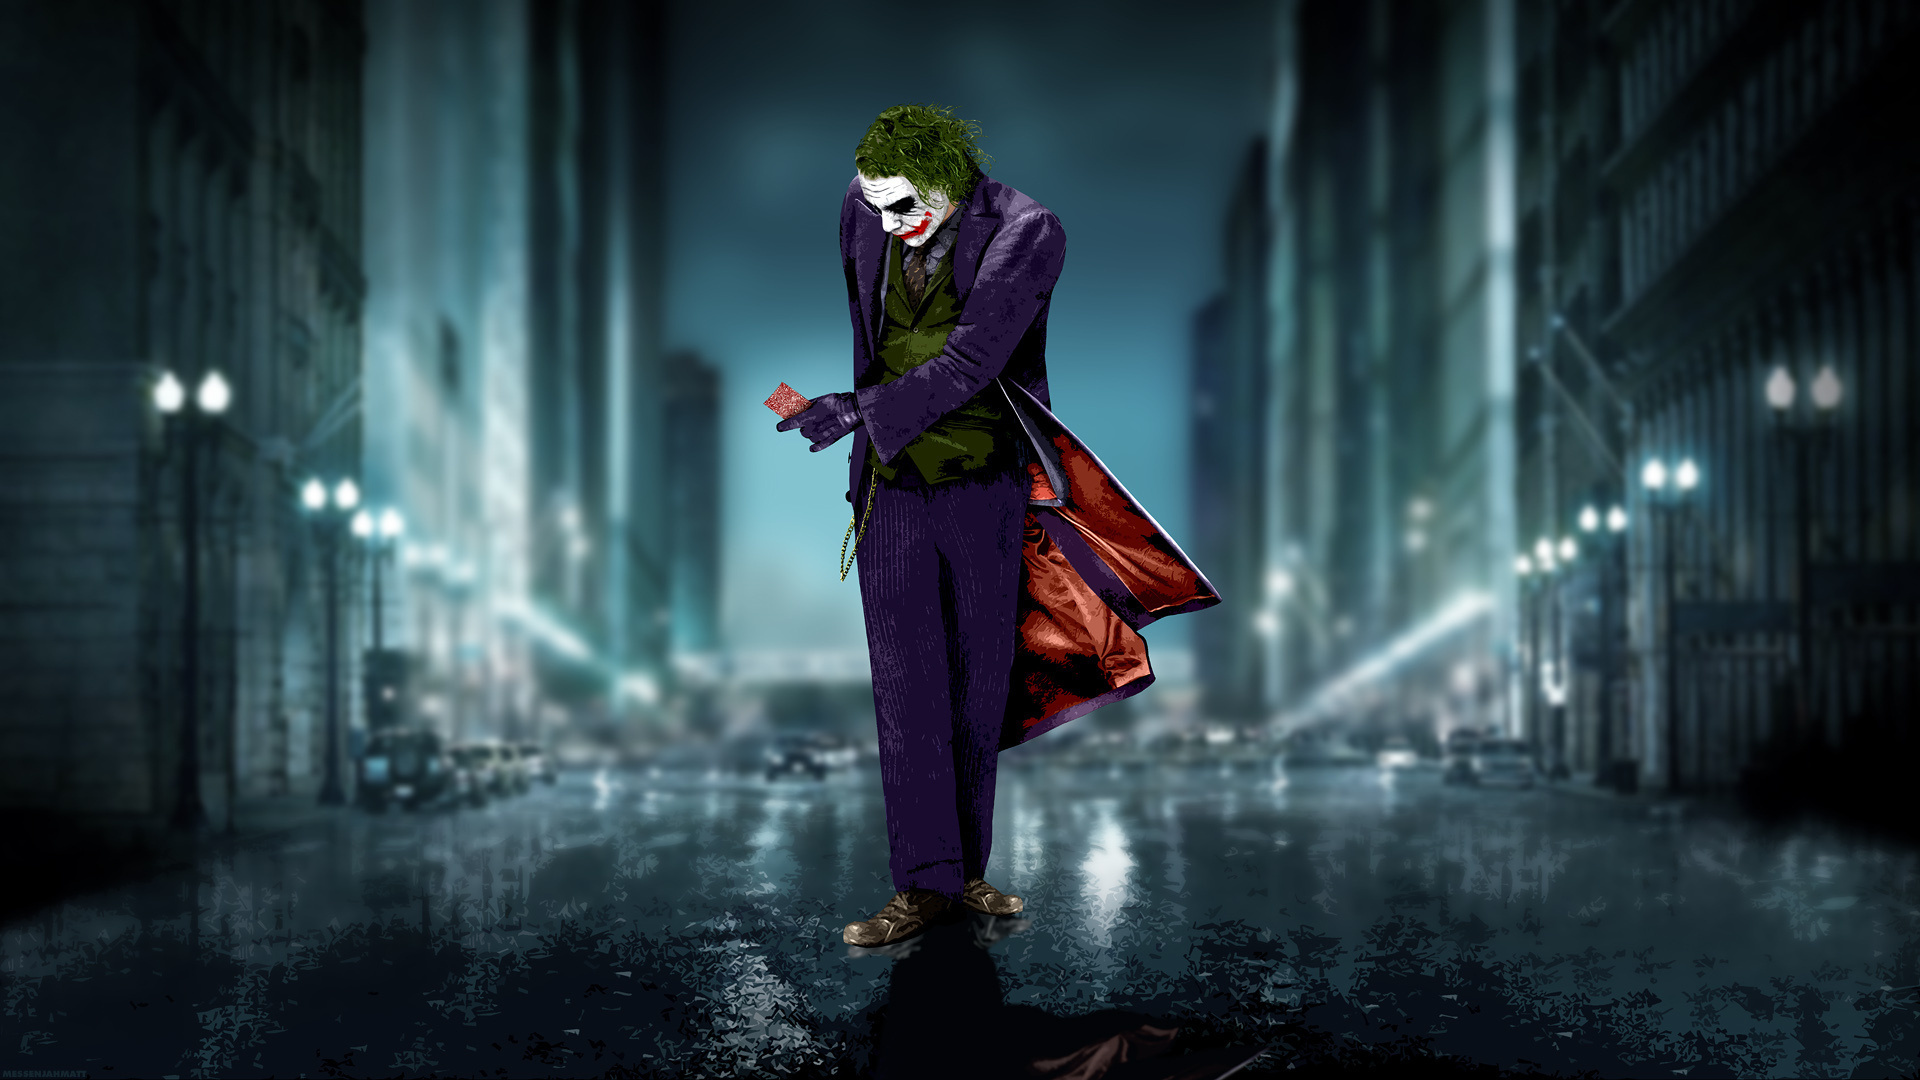 Free download 1080p 720p Quality Free HD wallpapers Widescreen Backgrounds  3D [1920x1080] for your Desktop, Mobile & Tablet | Explore 48+ The Joker  Wallpaper 1080p | The Joker Wallpapers, The Dark Knight